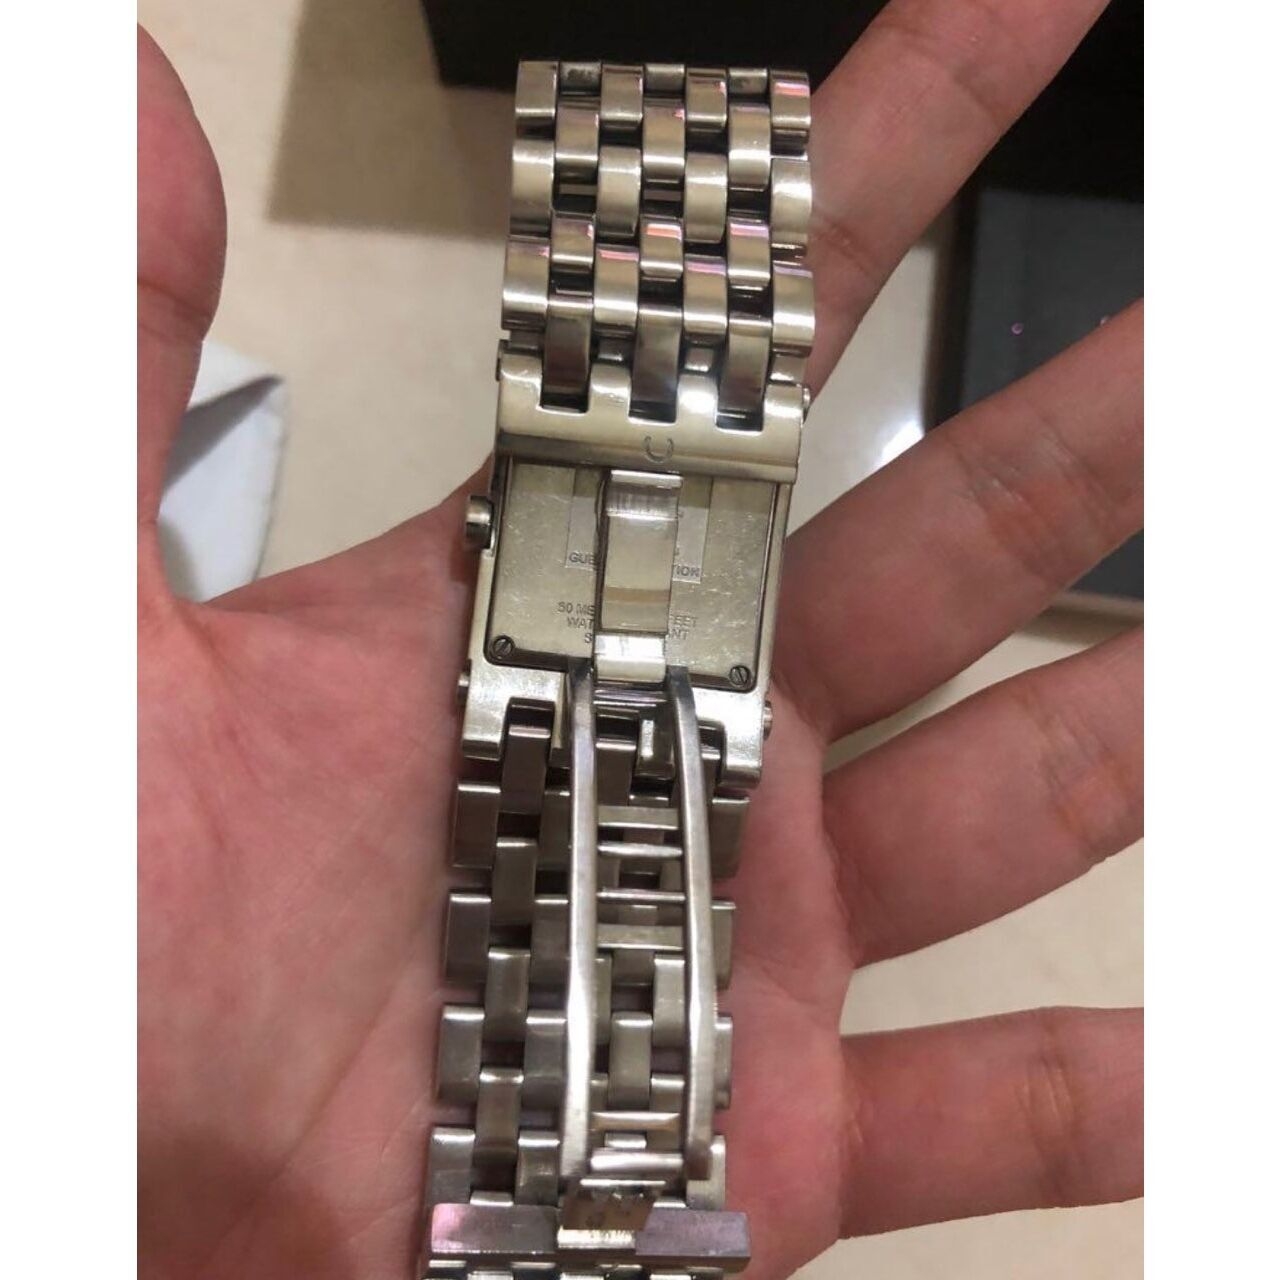 Guess Collection Silver Watch